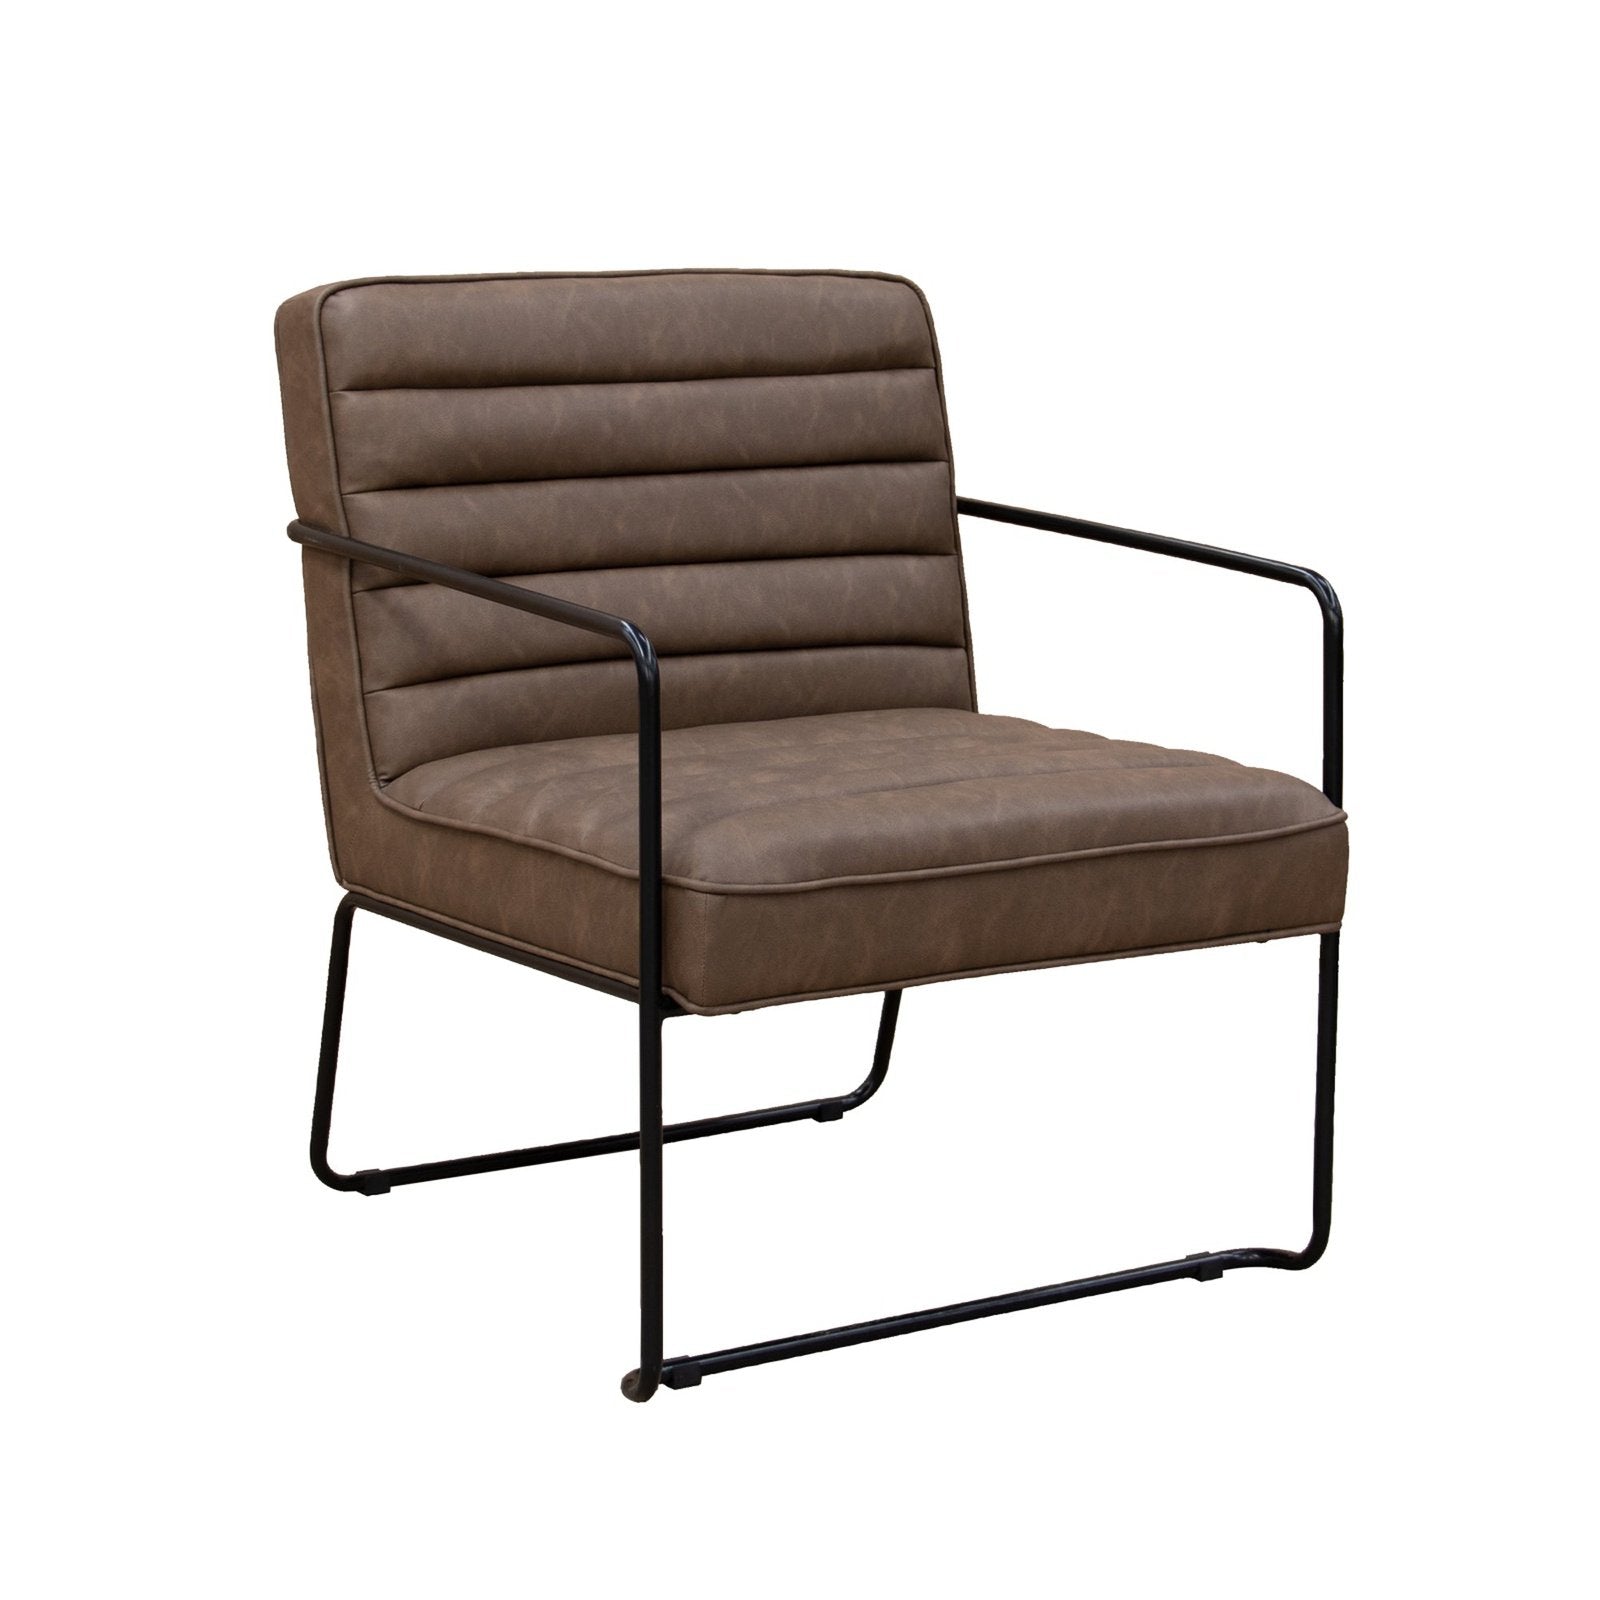 Decco ribbed lounge chair with black metal frame - brown leather - Office Products Online